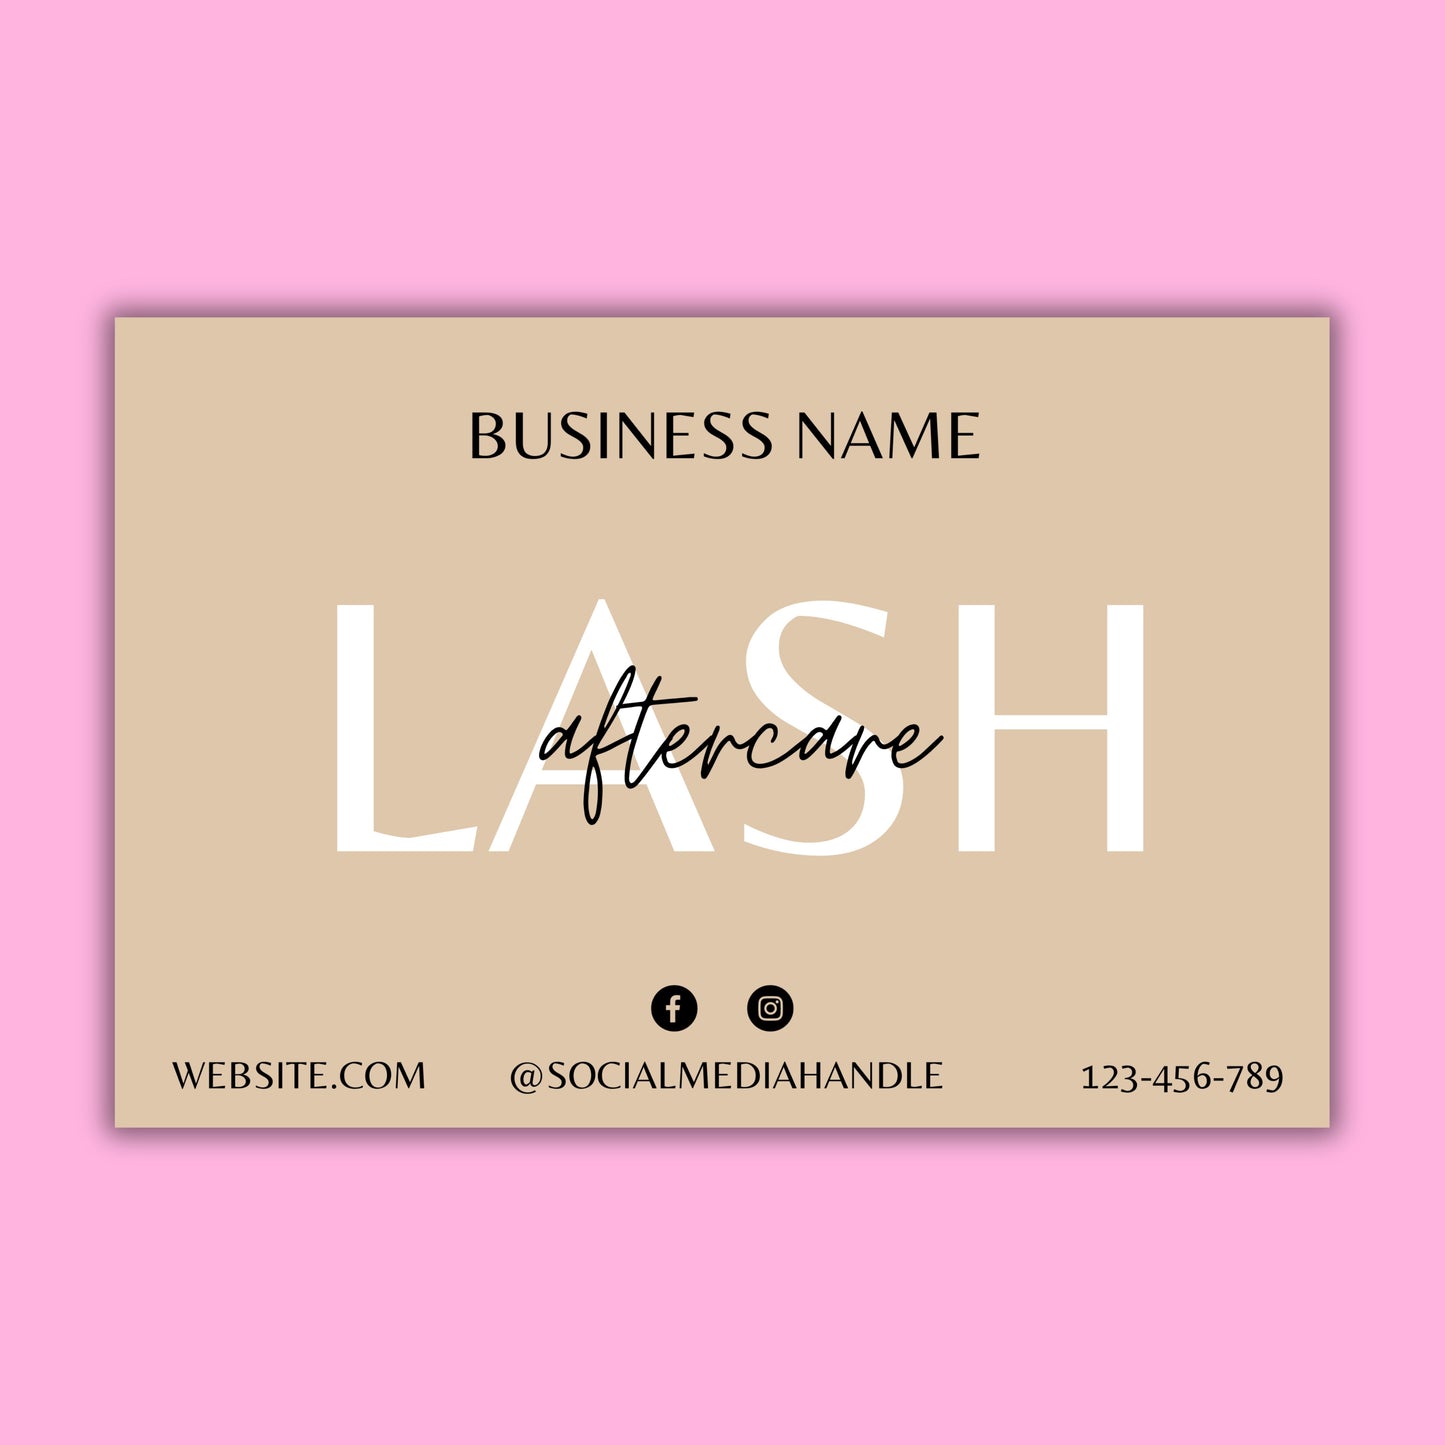 Custom Lash Aftercare Cards